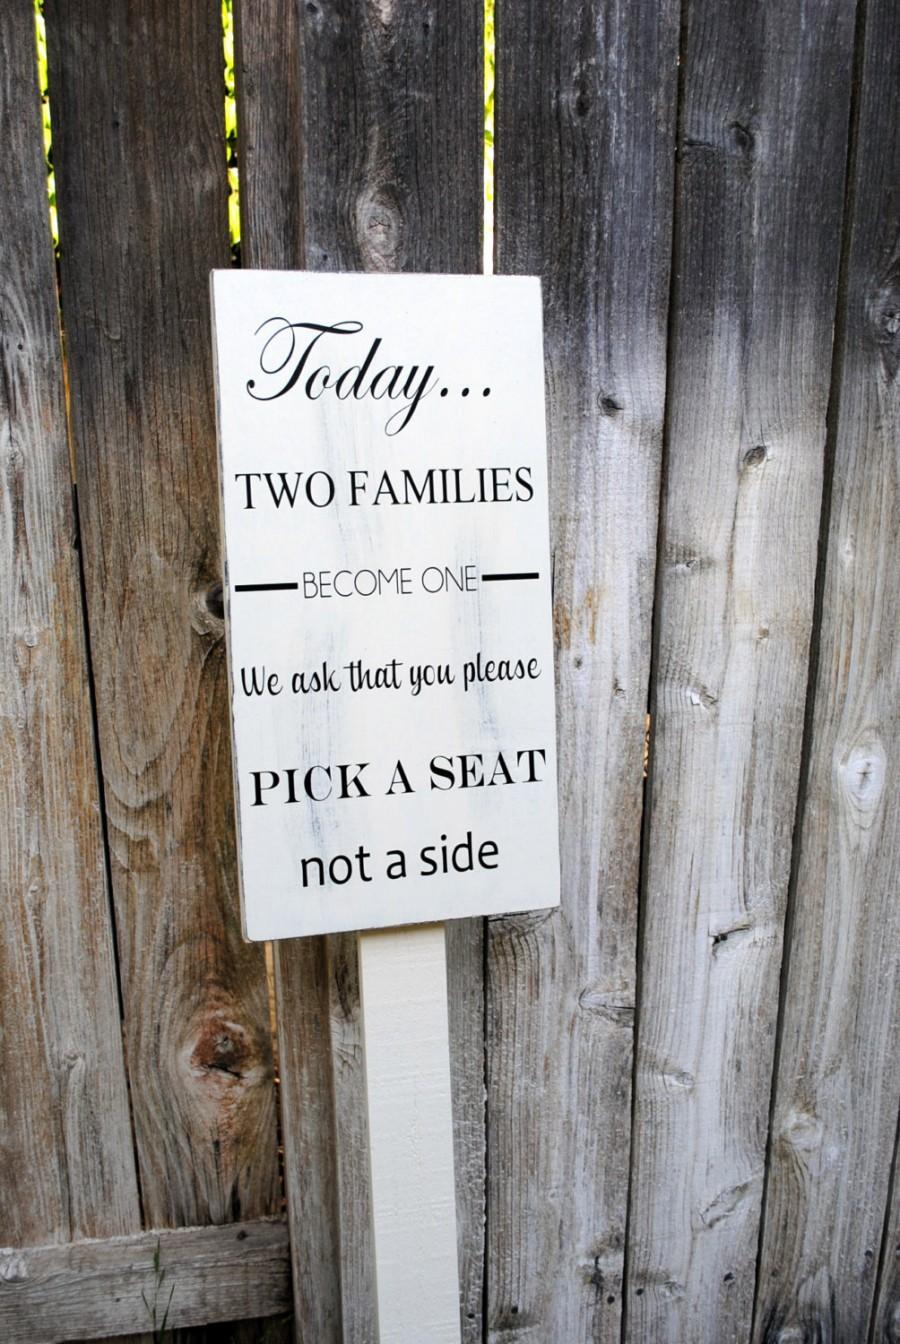 Wedding - 10"x18 shabby chic Today, two families become one, pick a seat not a side wood sign, seating sign ON STAKE